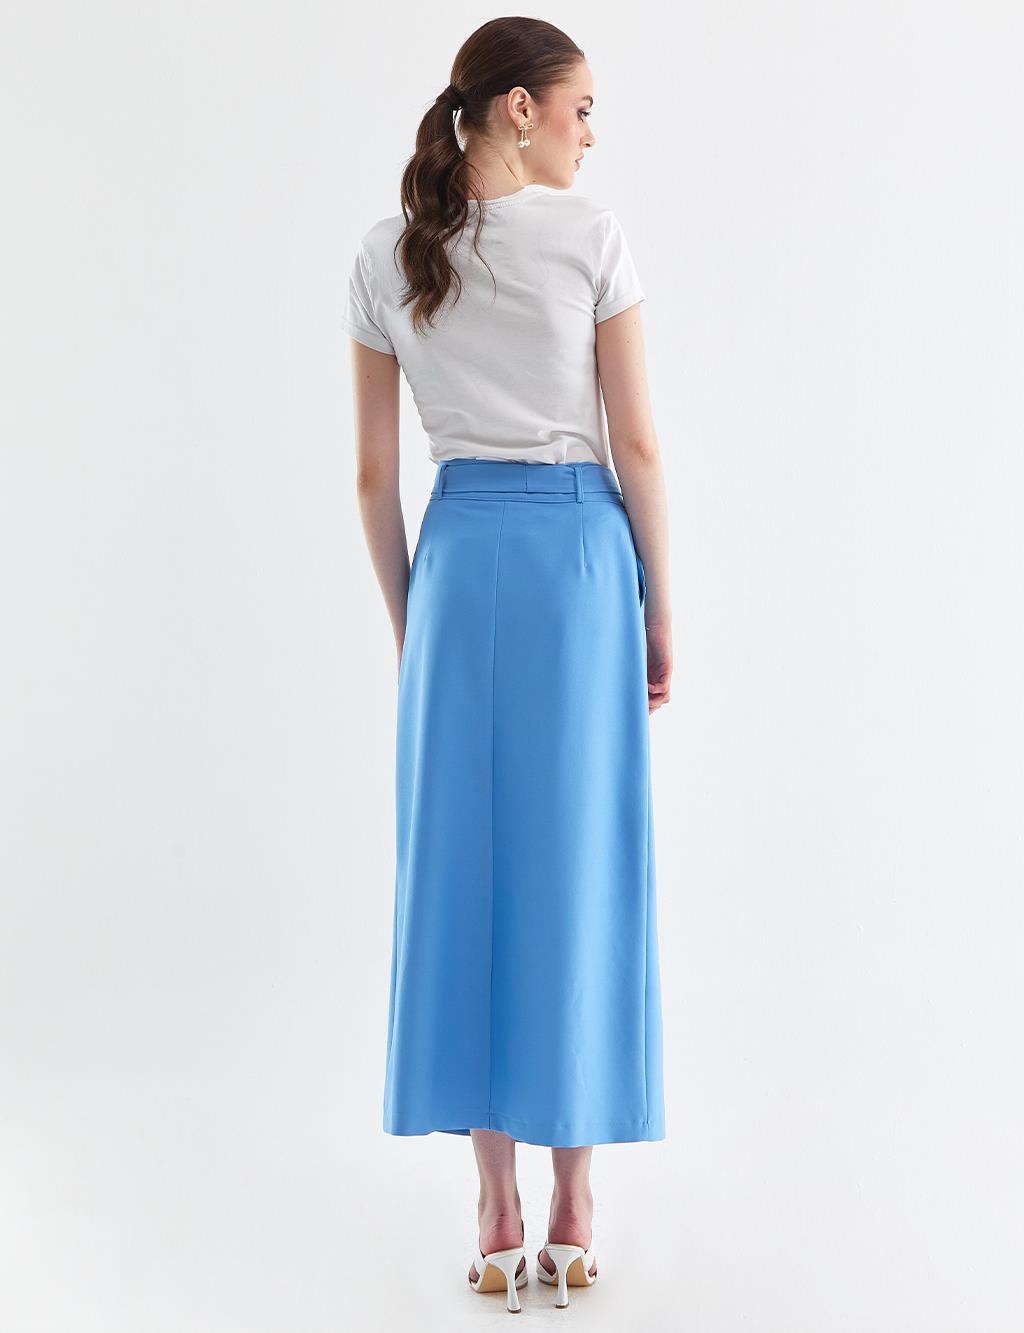 Button Detailed Double Breasted Skirt Sky Blue